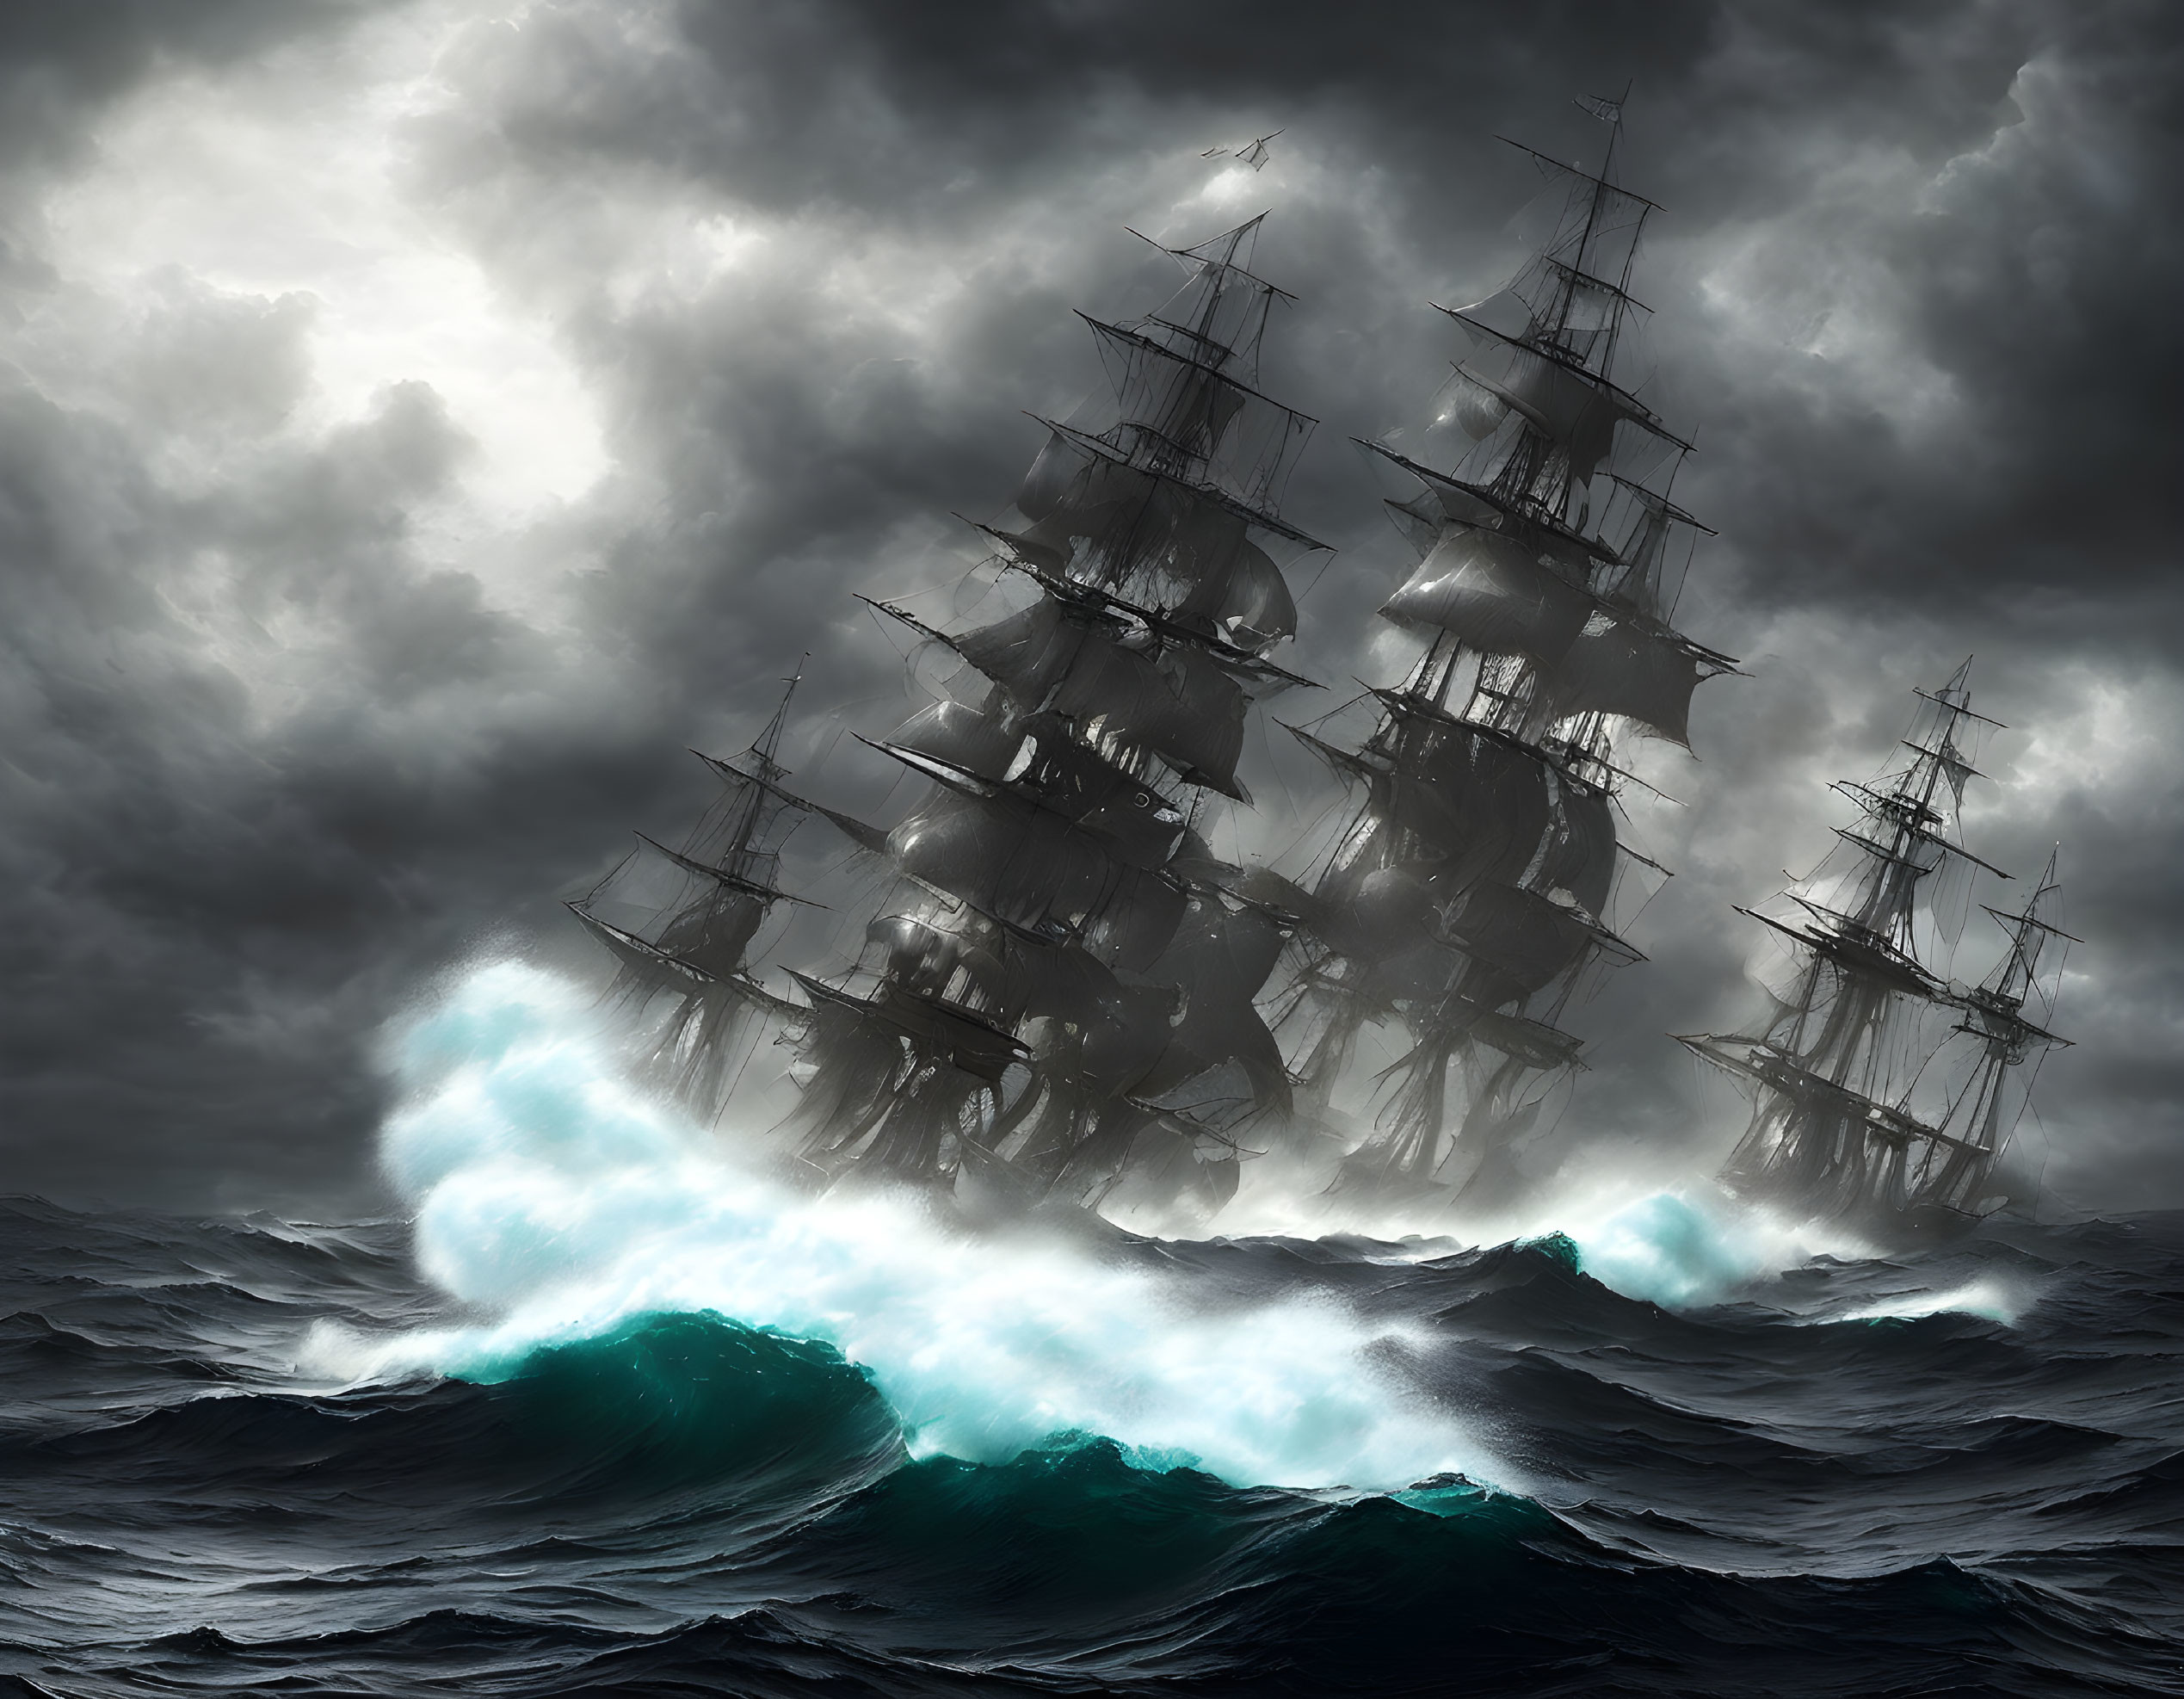 Tall ships sailing in stormy ocean with bioluminescence